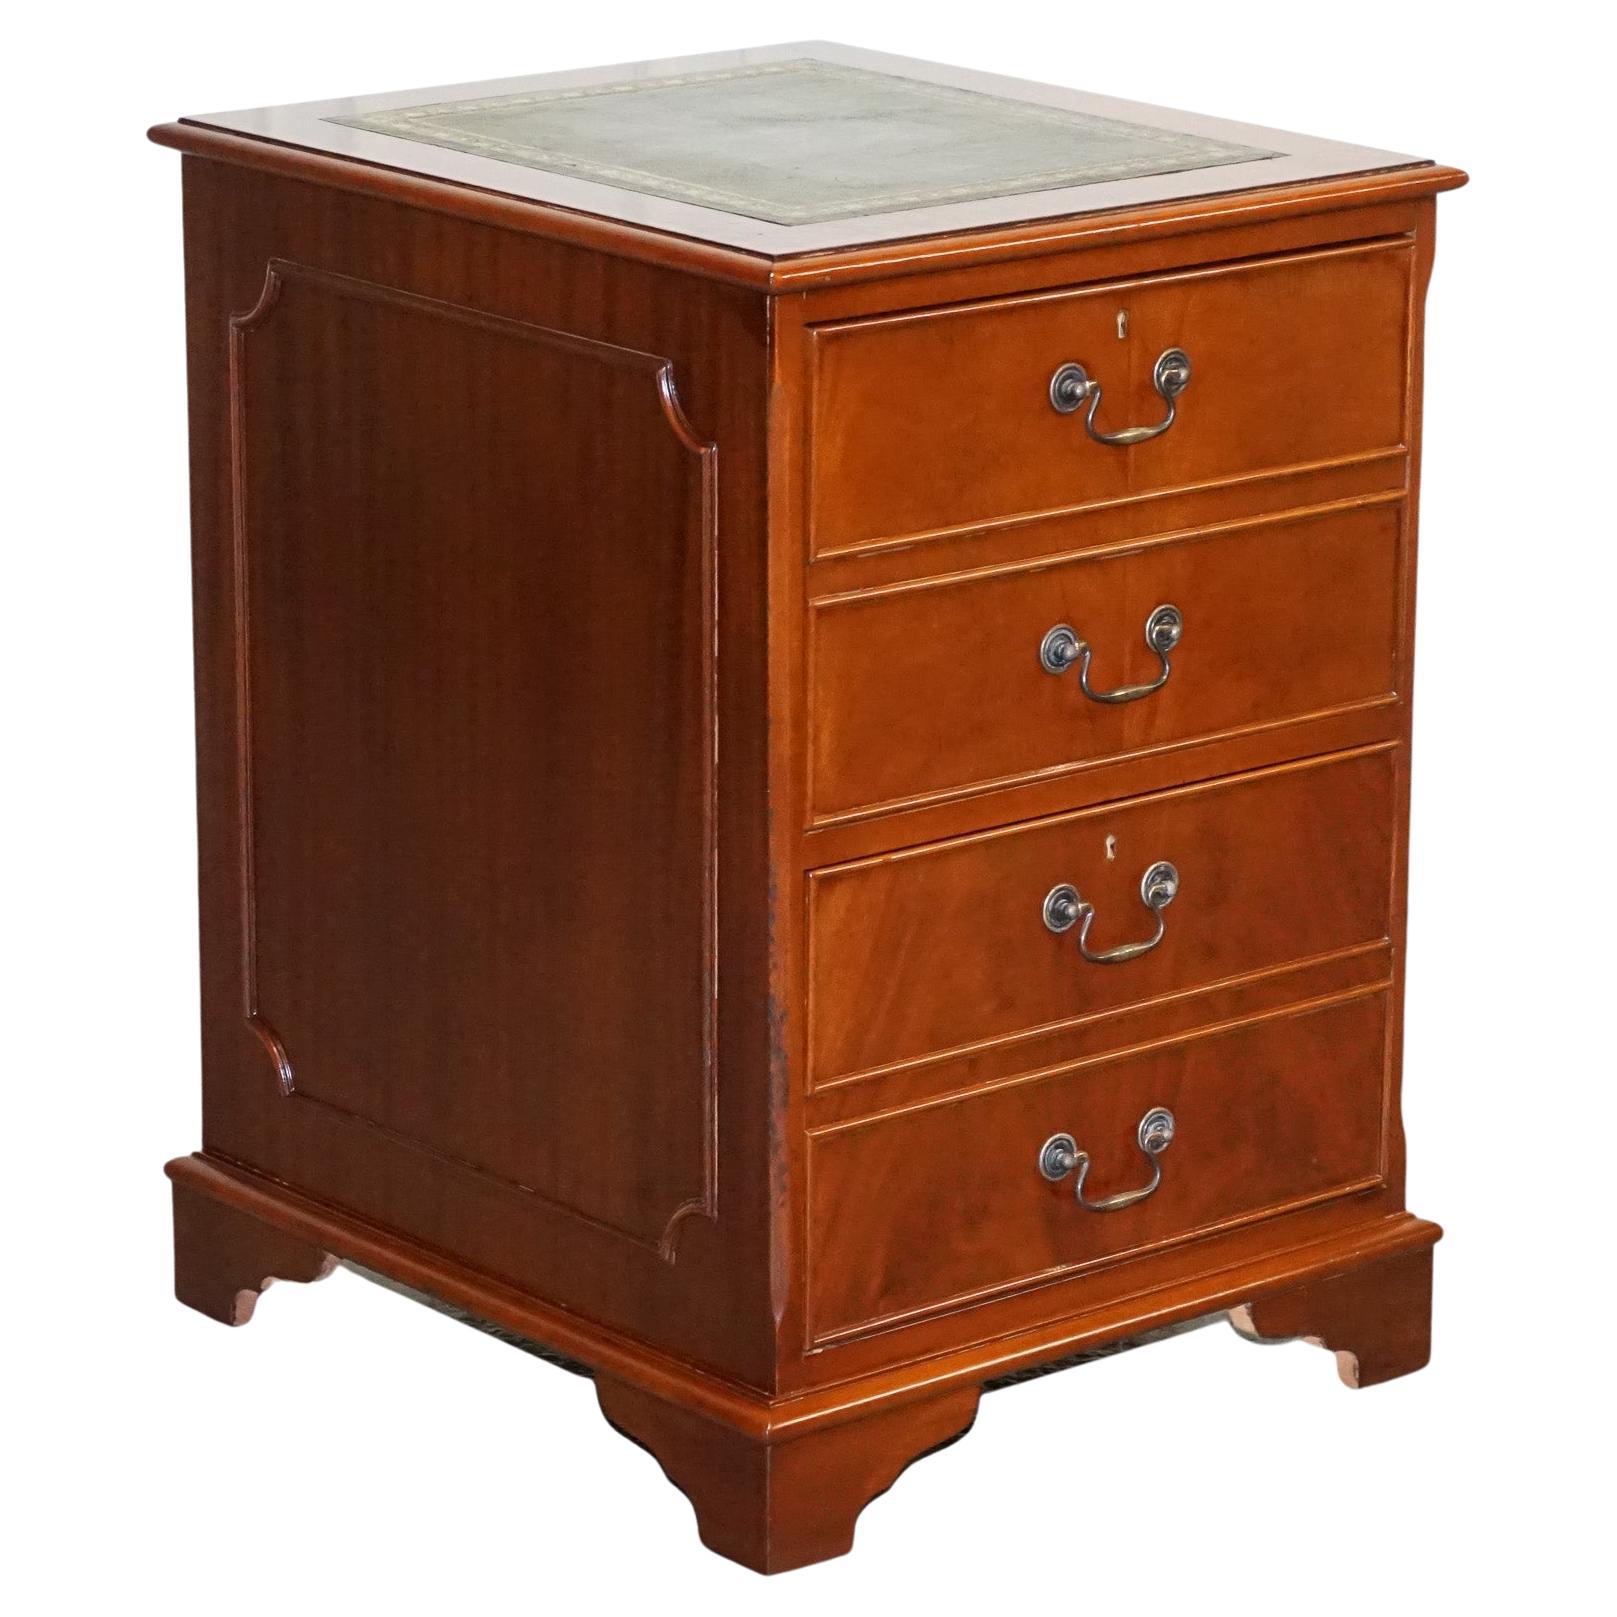 Yew Wood Green Leather Top Filling Cabinet